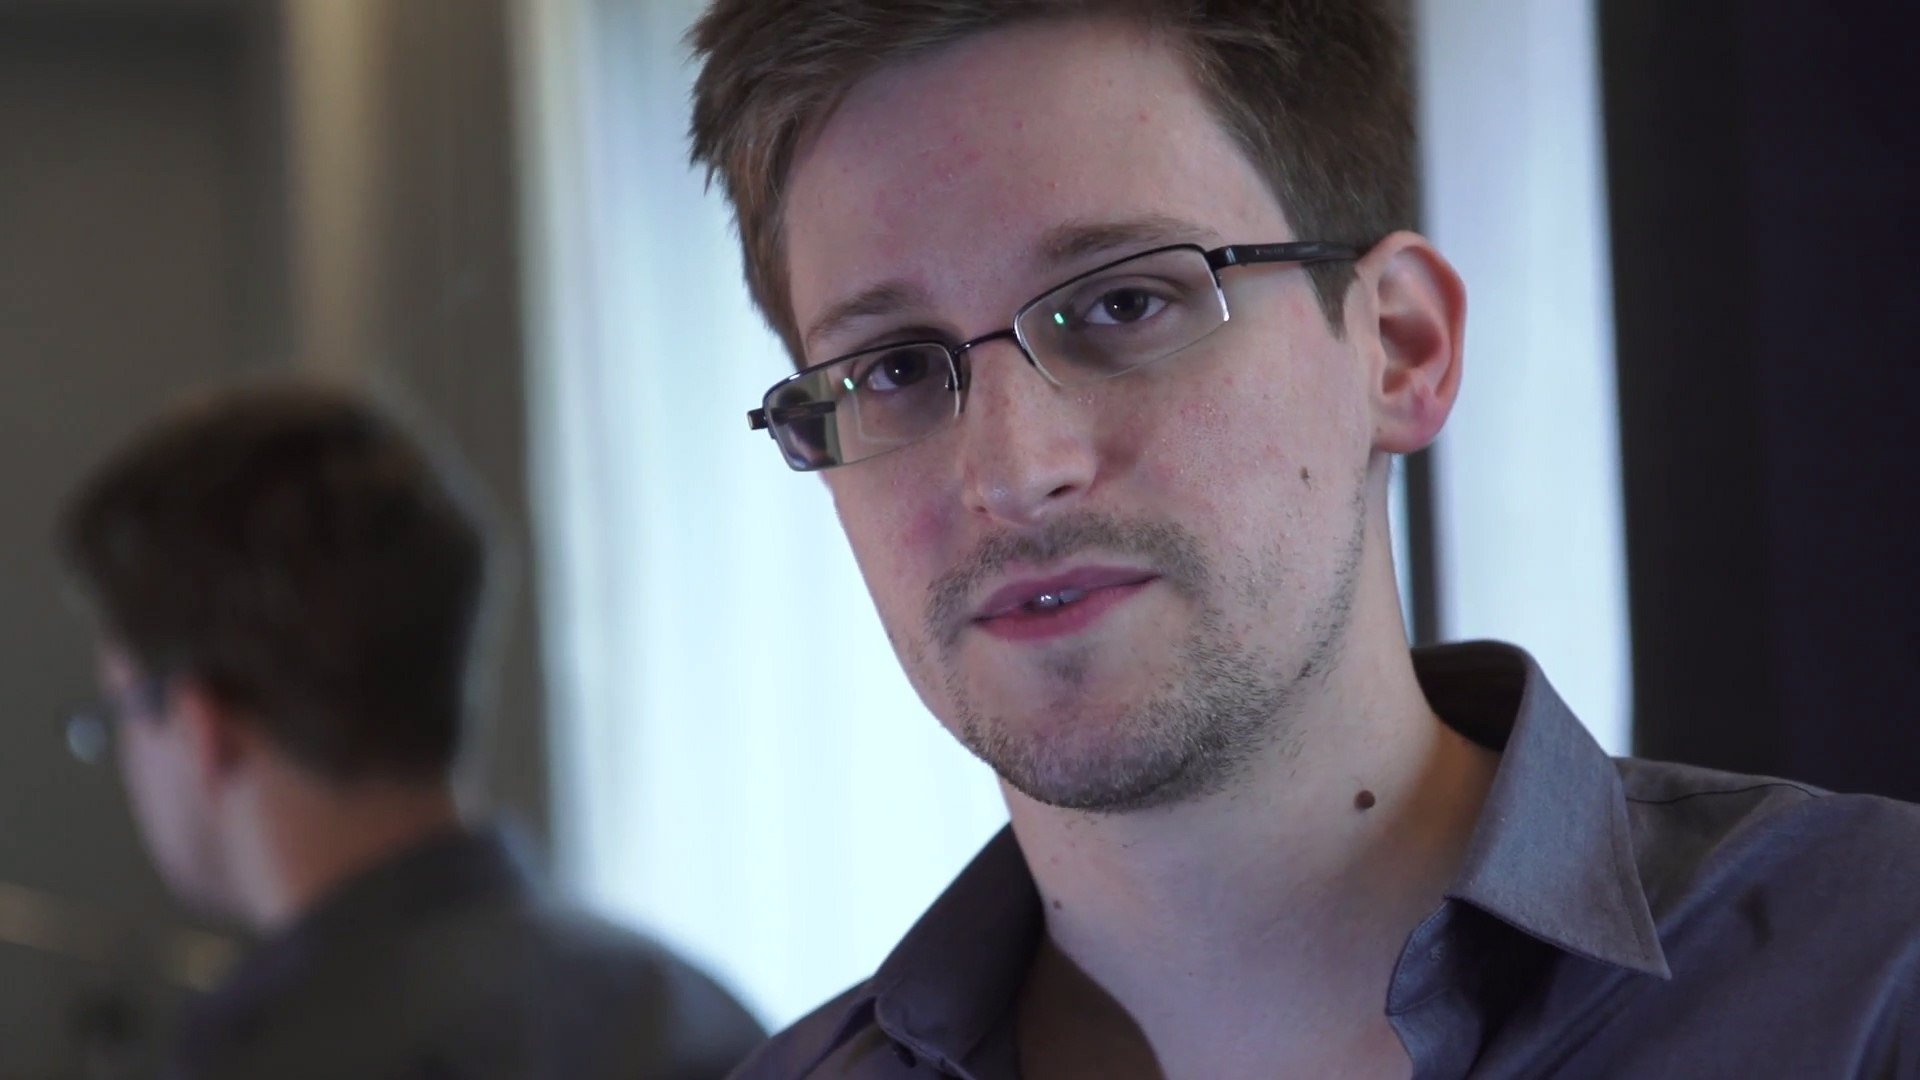 Former CIA employee Edward Snowden said he chose Hong Kong years ago to leak classified US information because of the city’s press freedoms. Photo: EPA-EFE/ The Guardian